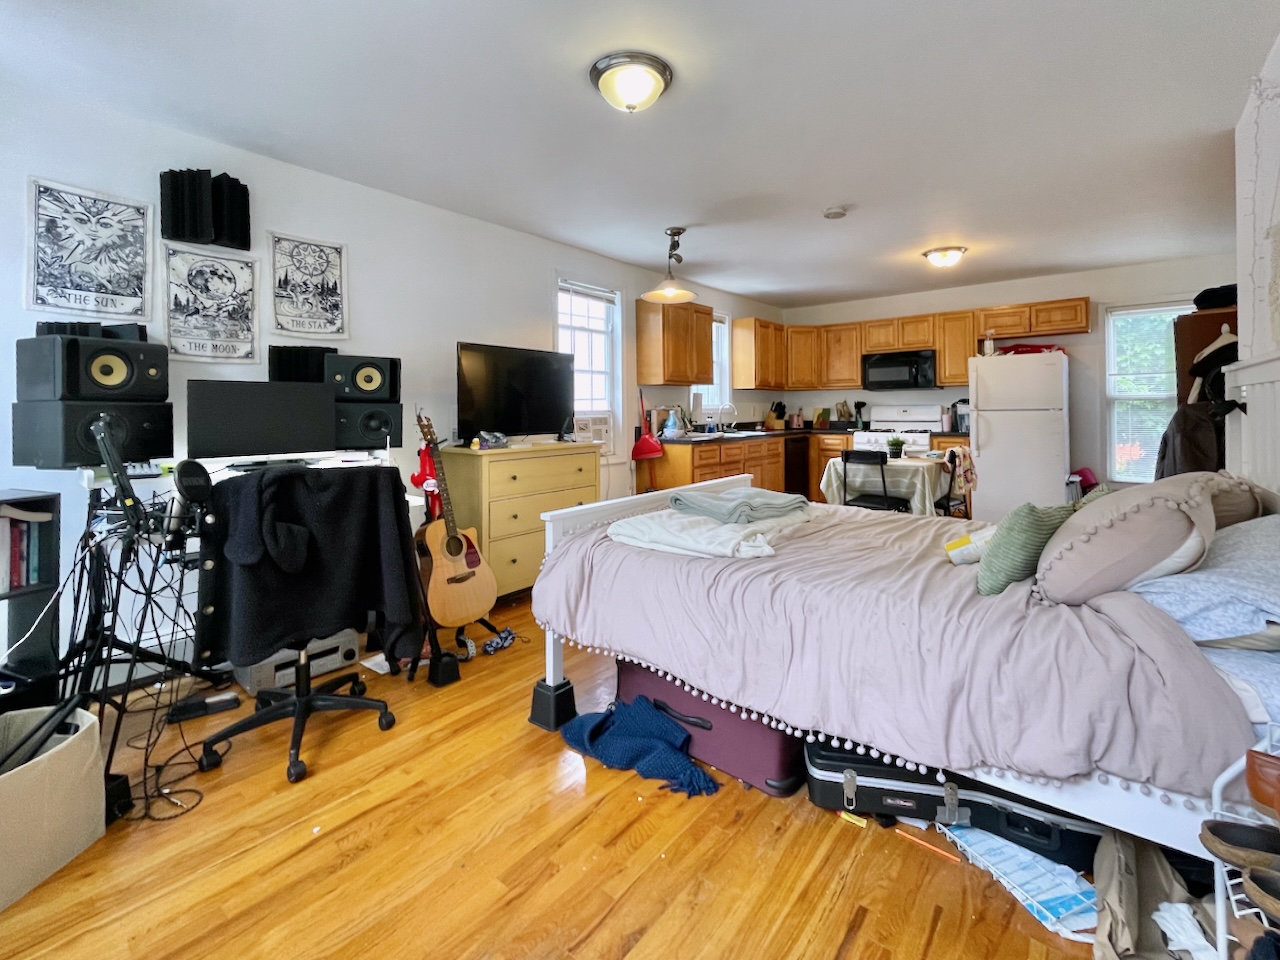 Great location near the JSQ PATH and Pershing Field Park. Updated studio, bright with windows on three sides. Laundry in the building as well as a shared backyard. Only one flight up on the second floor. Includes dishwasher, gas stove/oven, refrigerator/freezer, built-in microwave, hardwood floors. Close proximity to cafes, restaurants, parks and schools.